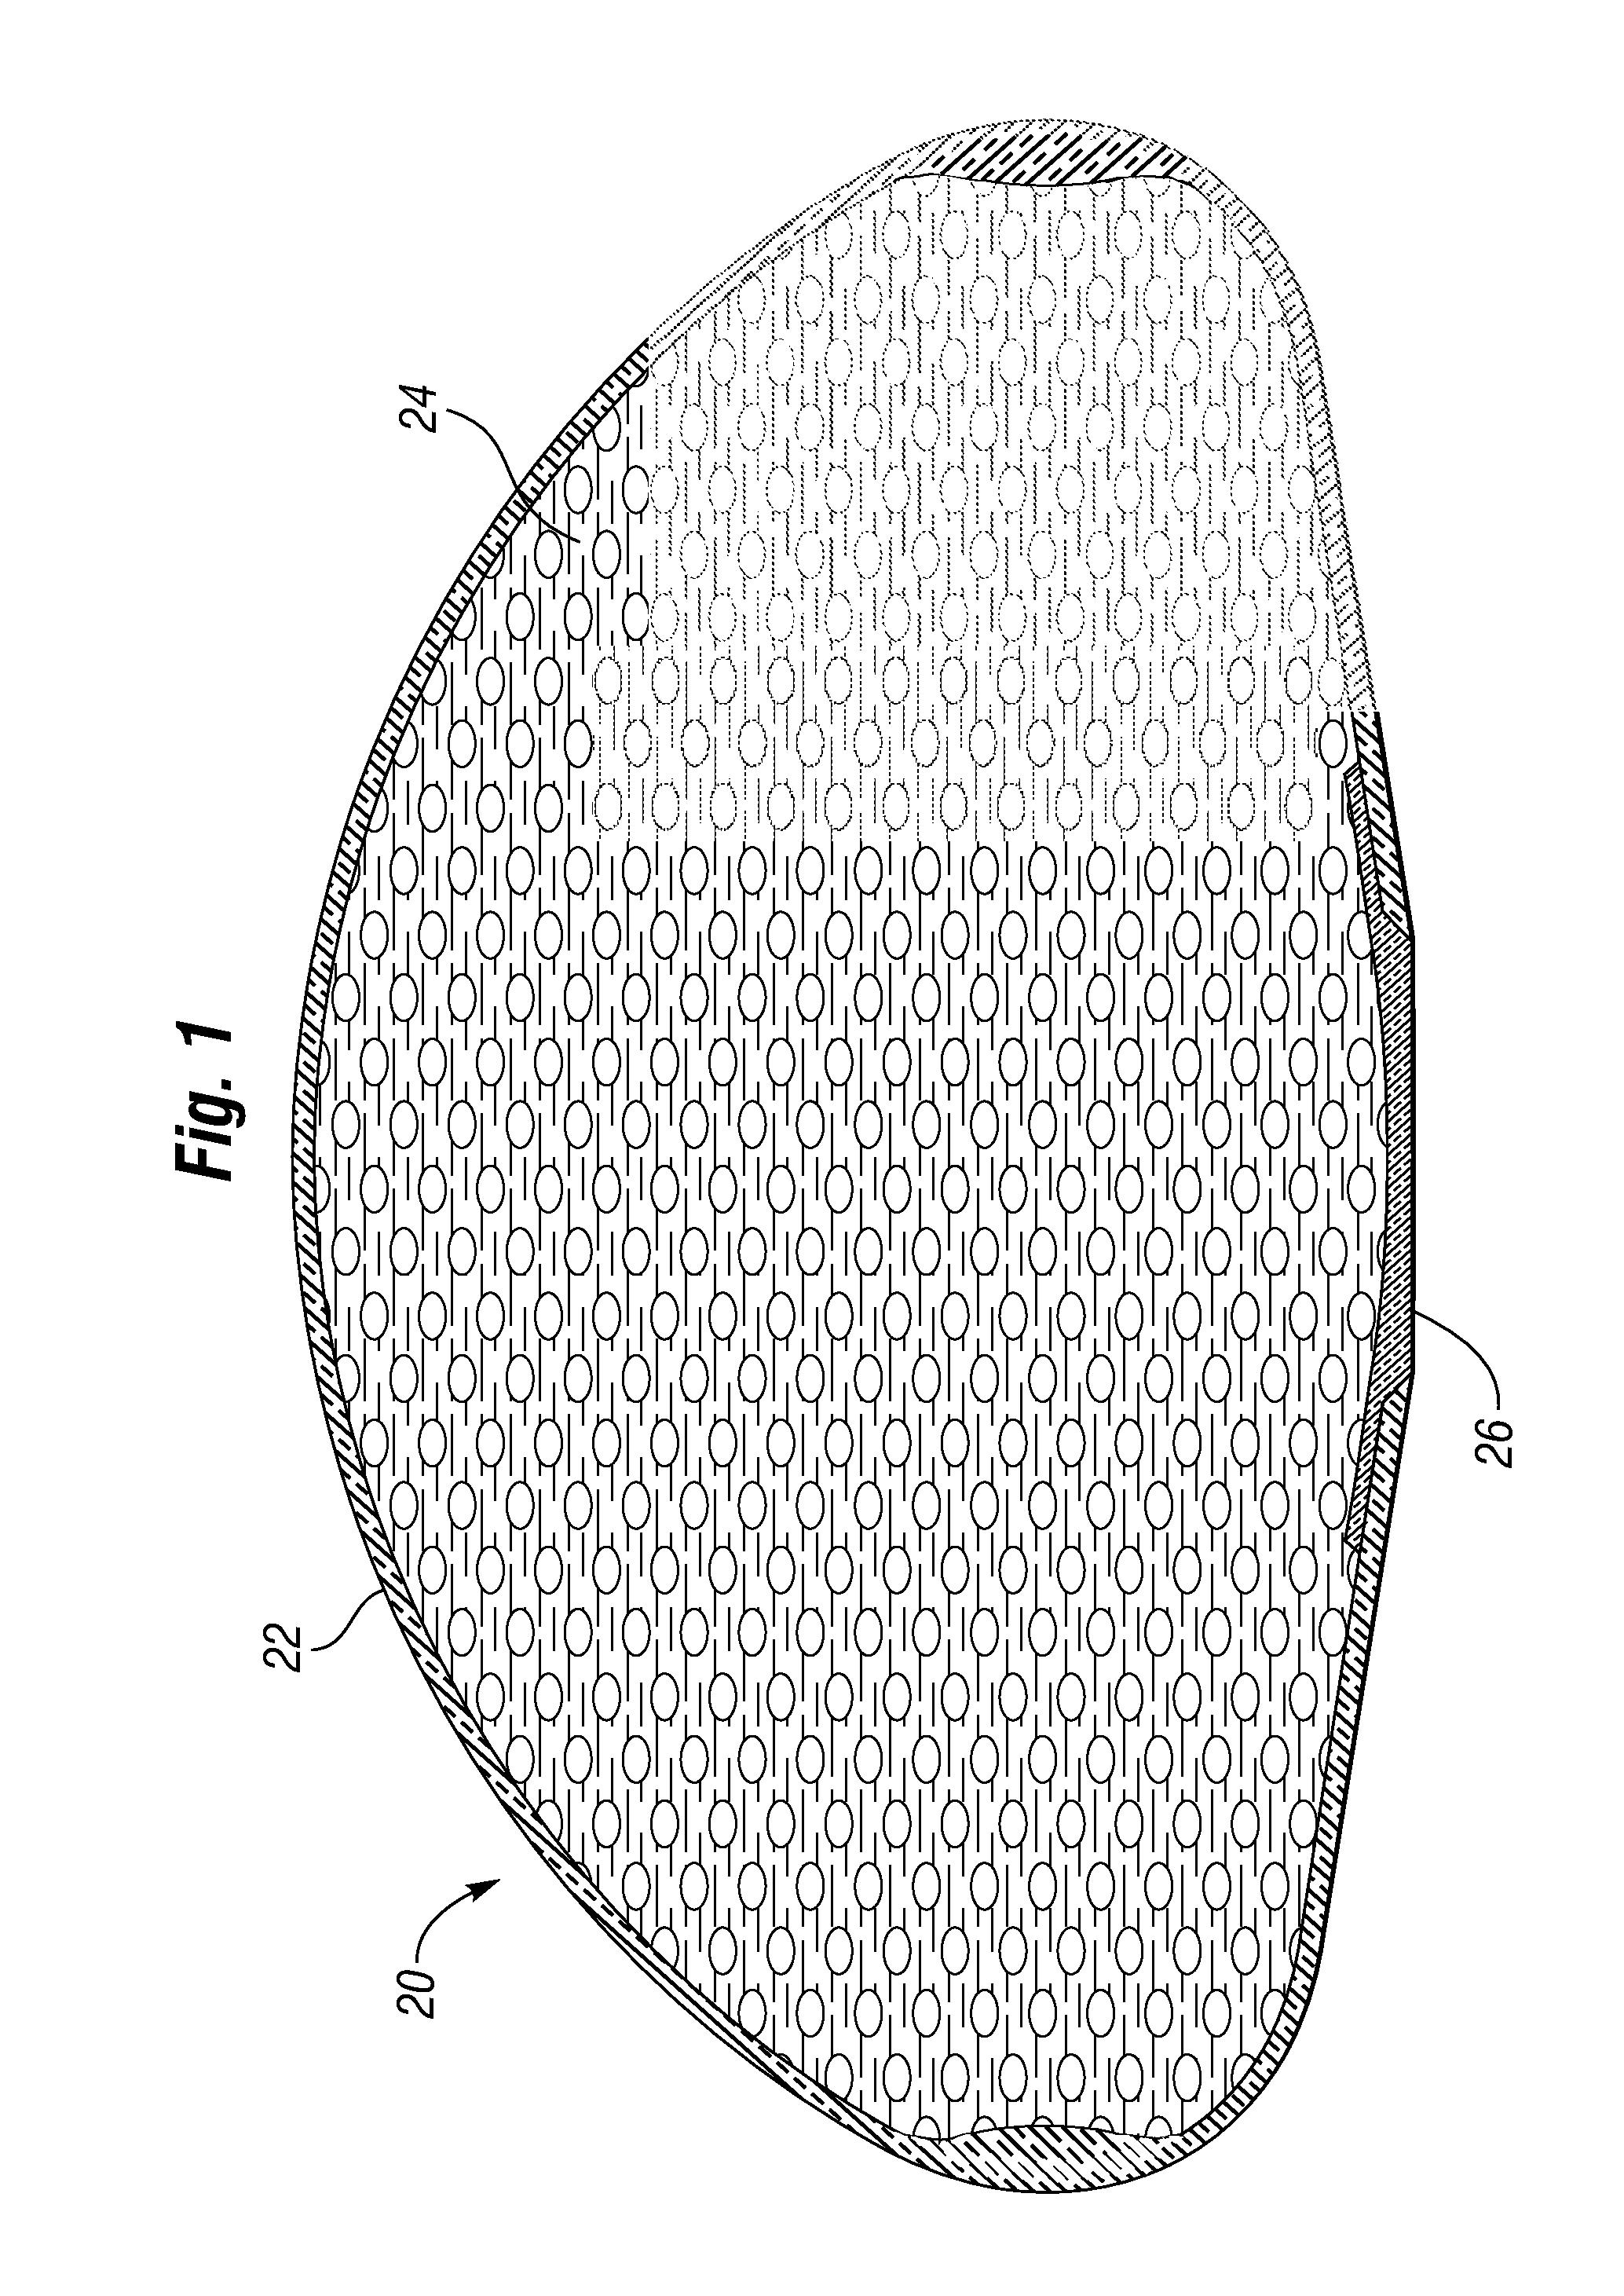 Reinforced prosthetic implant with flexible shell